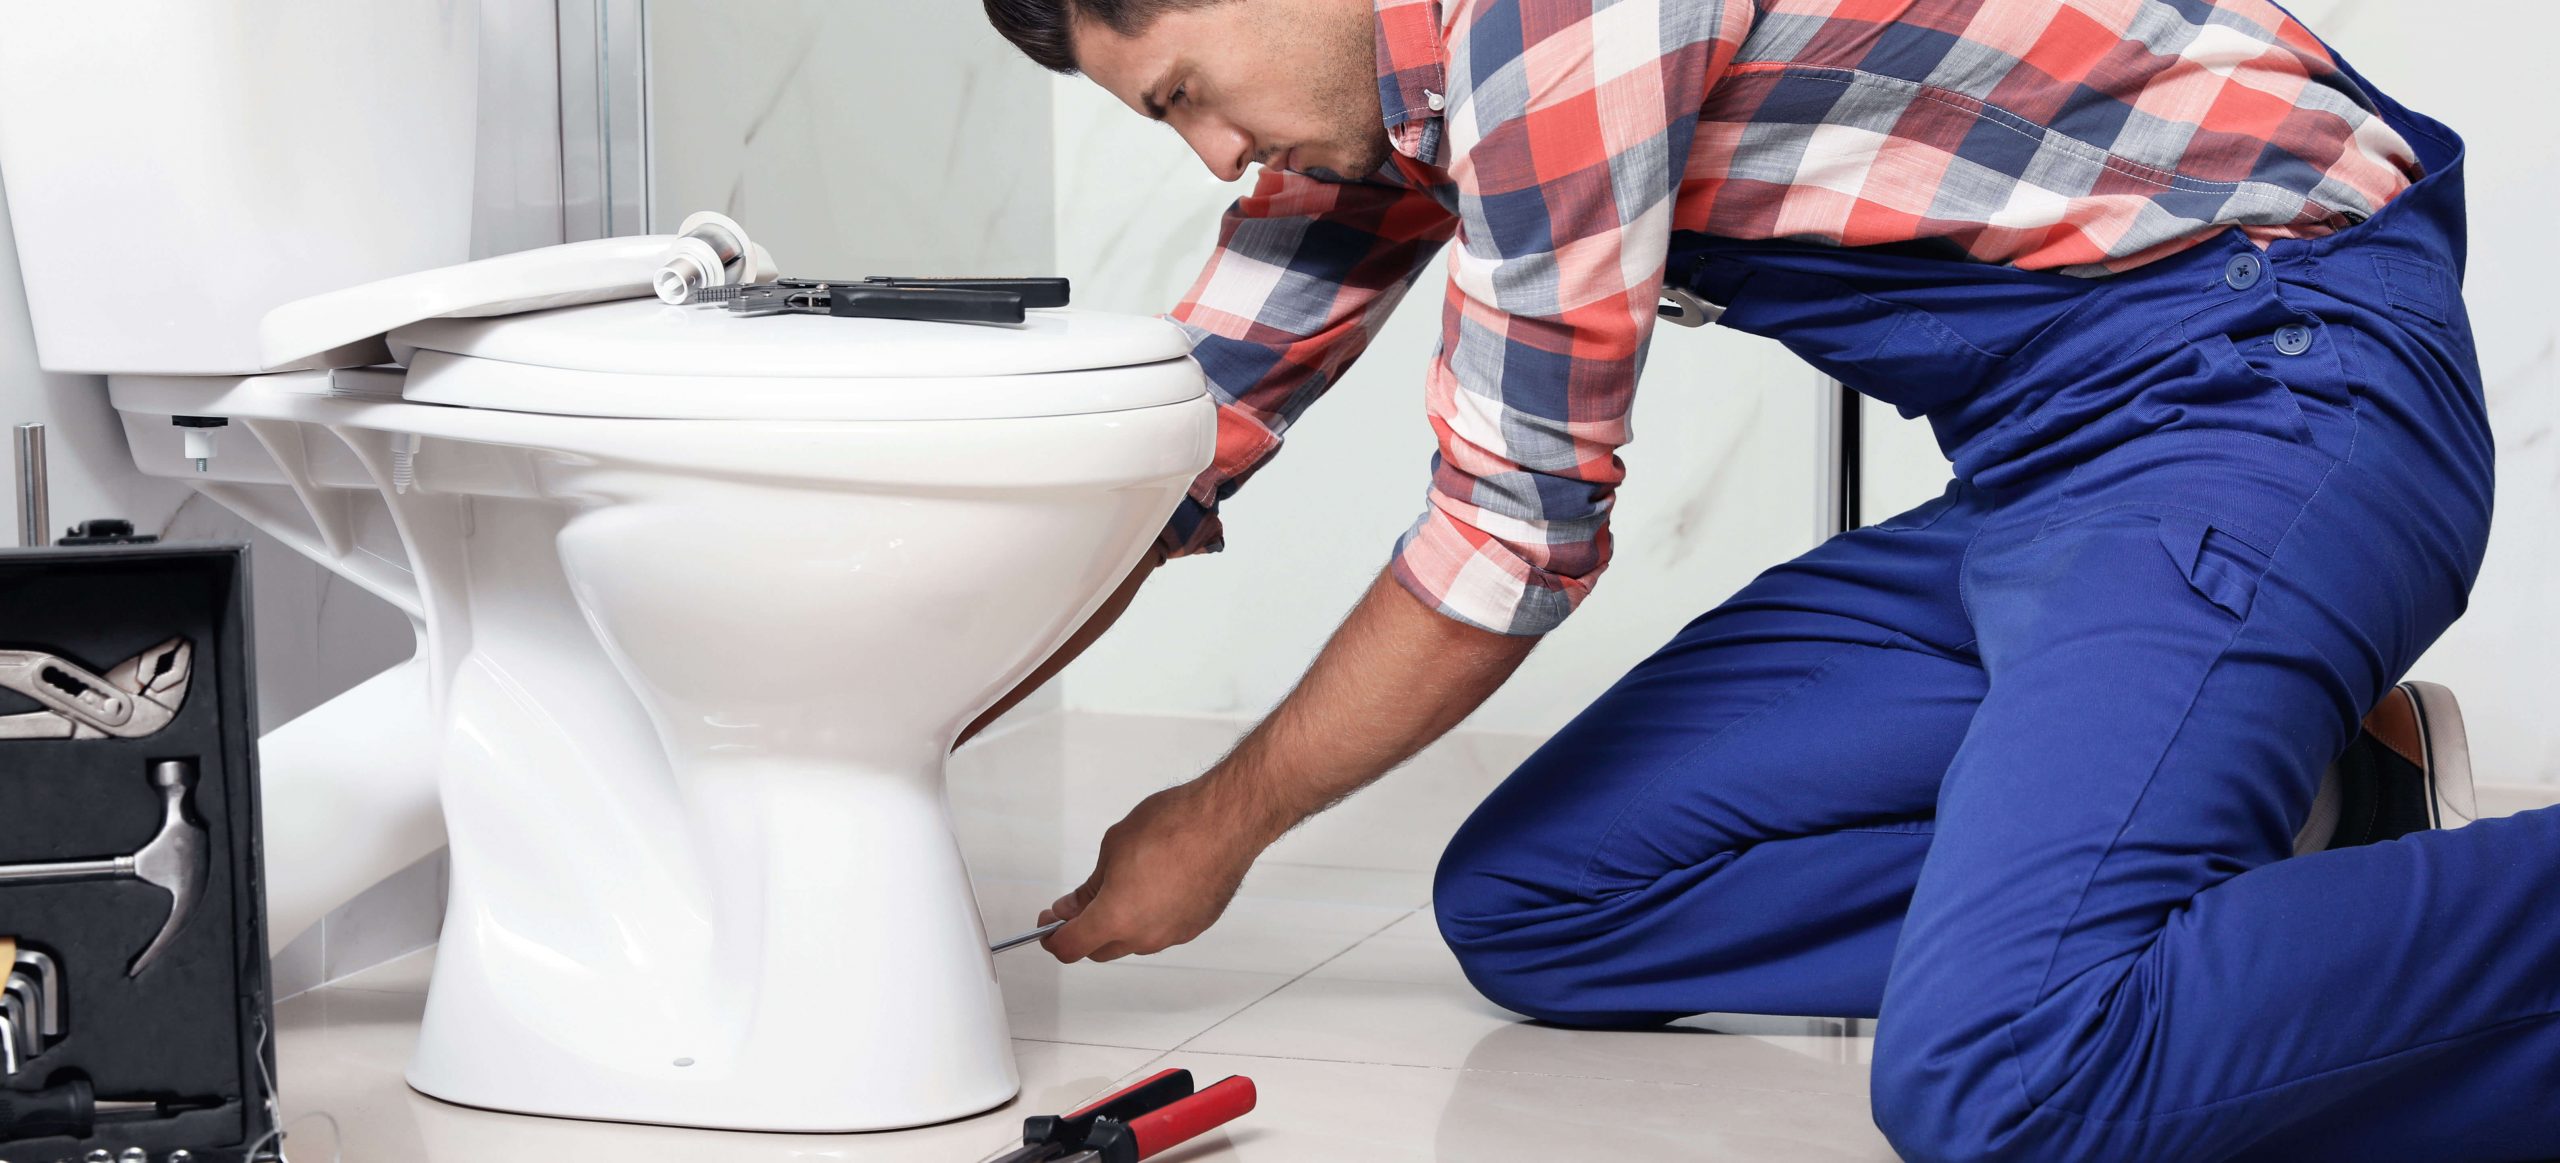 removing a toilet scaled